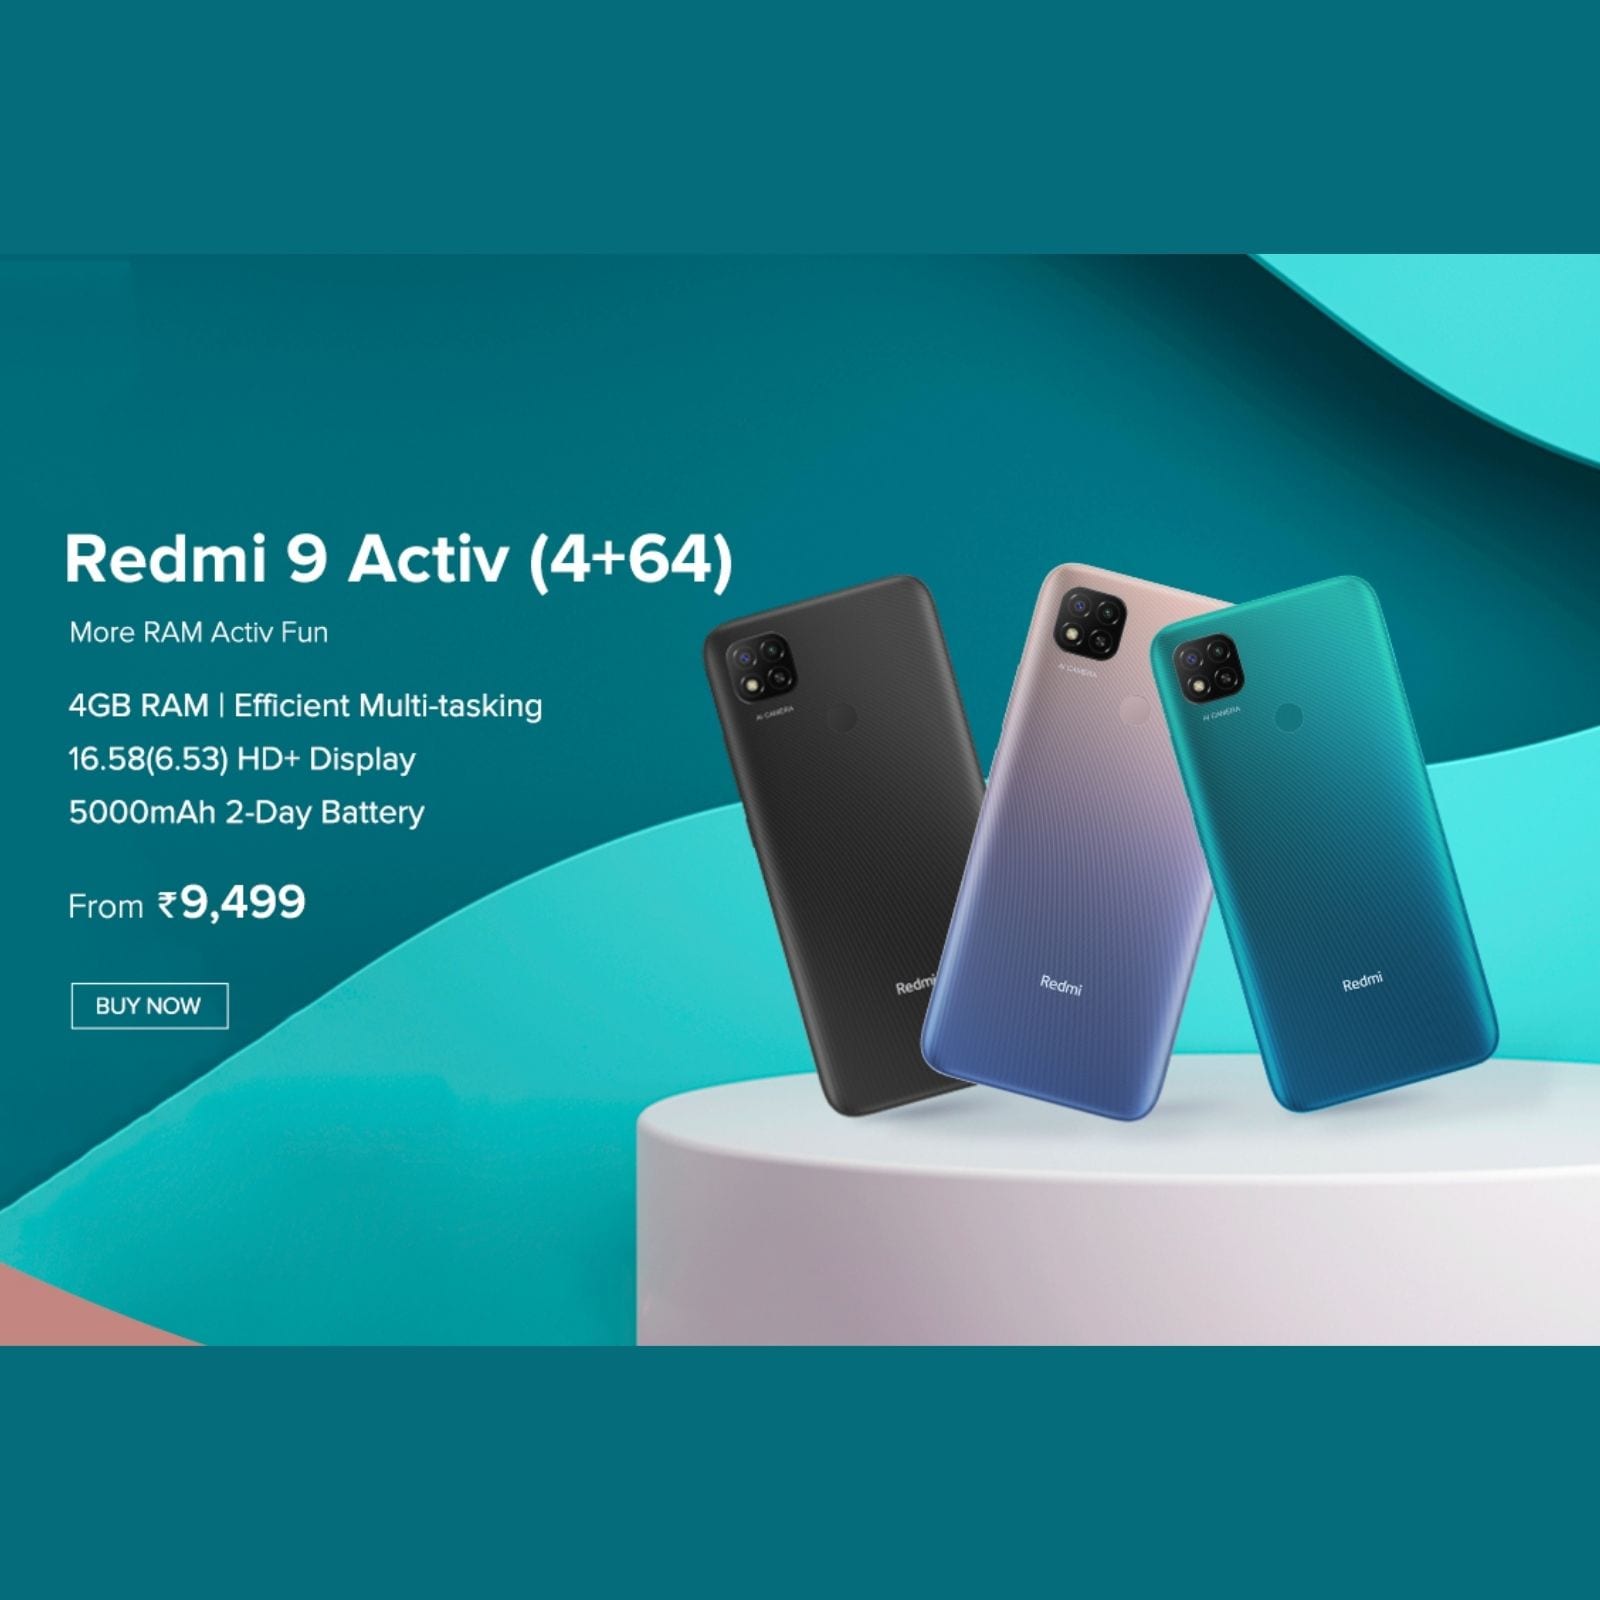 Redmi 9 Activ Launched In India Silently: Check Price, Specifications and  More - News18